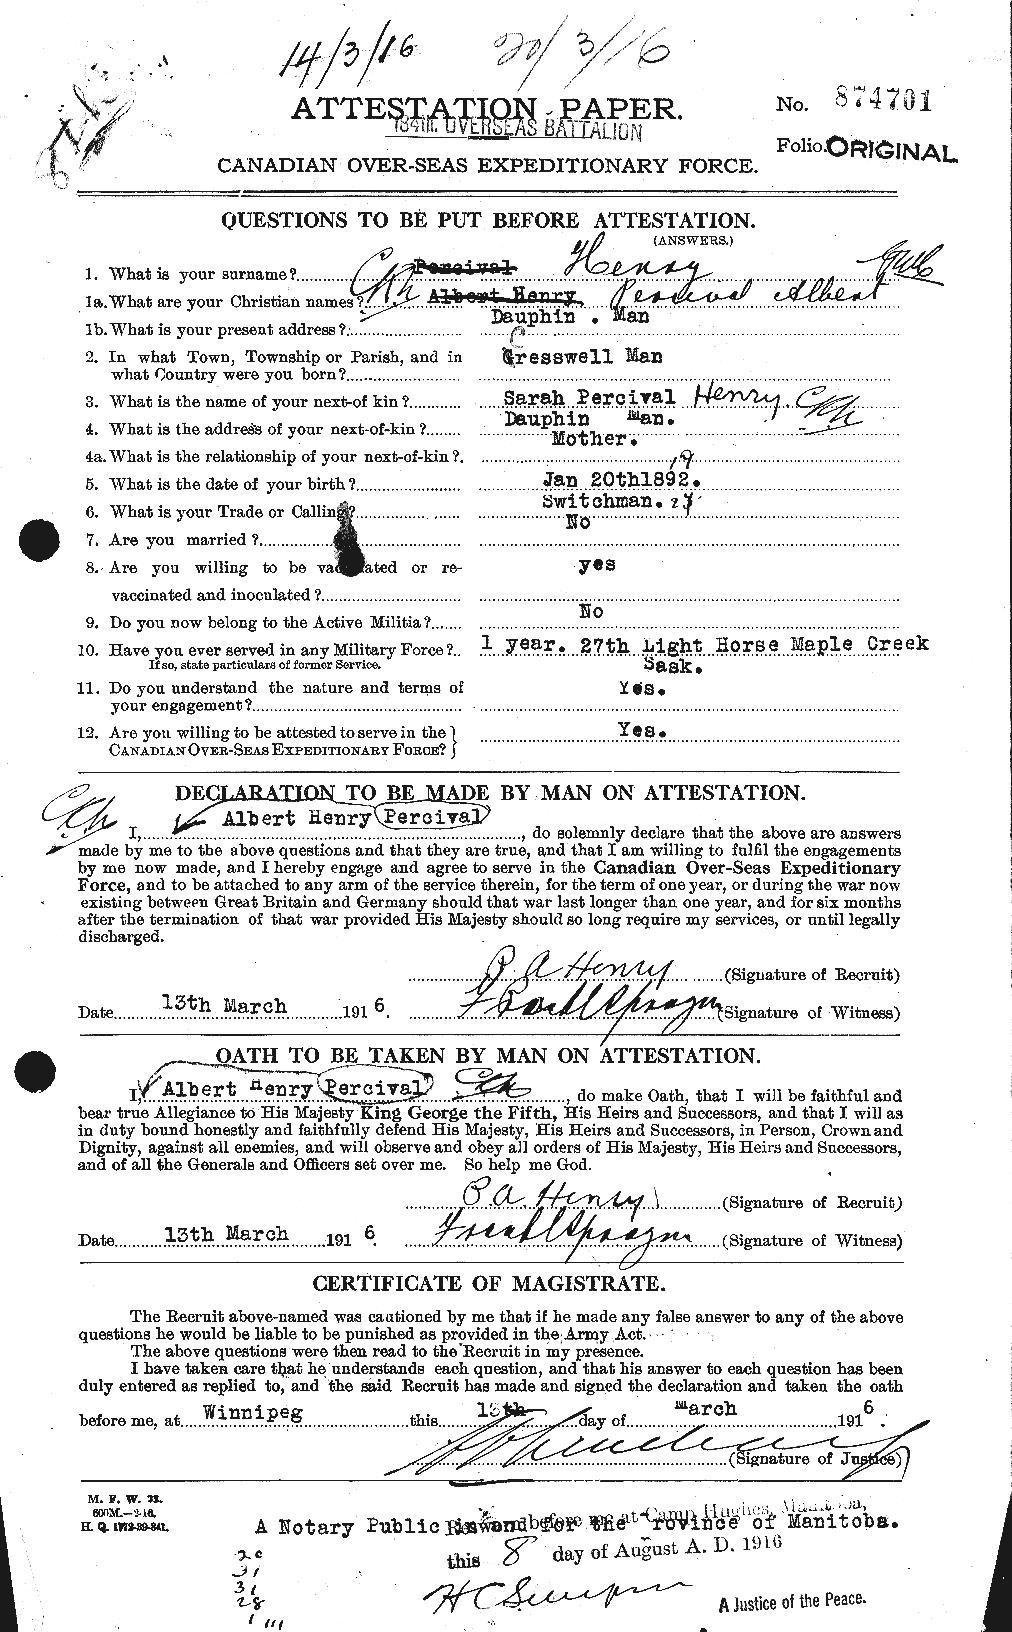 Personnel Records of the First World War - CEF 387683a